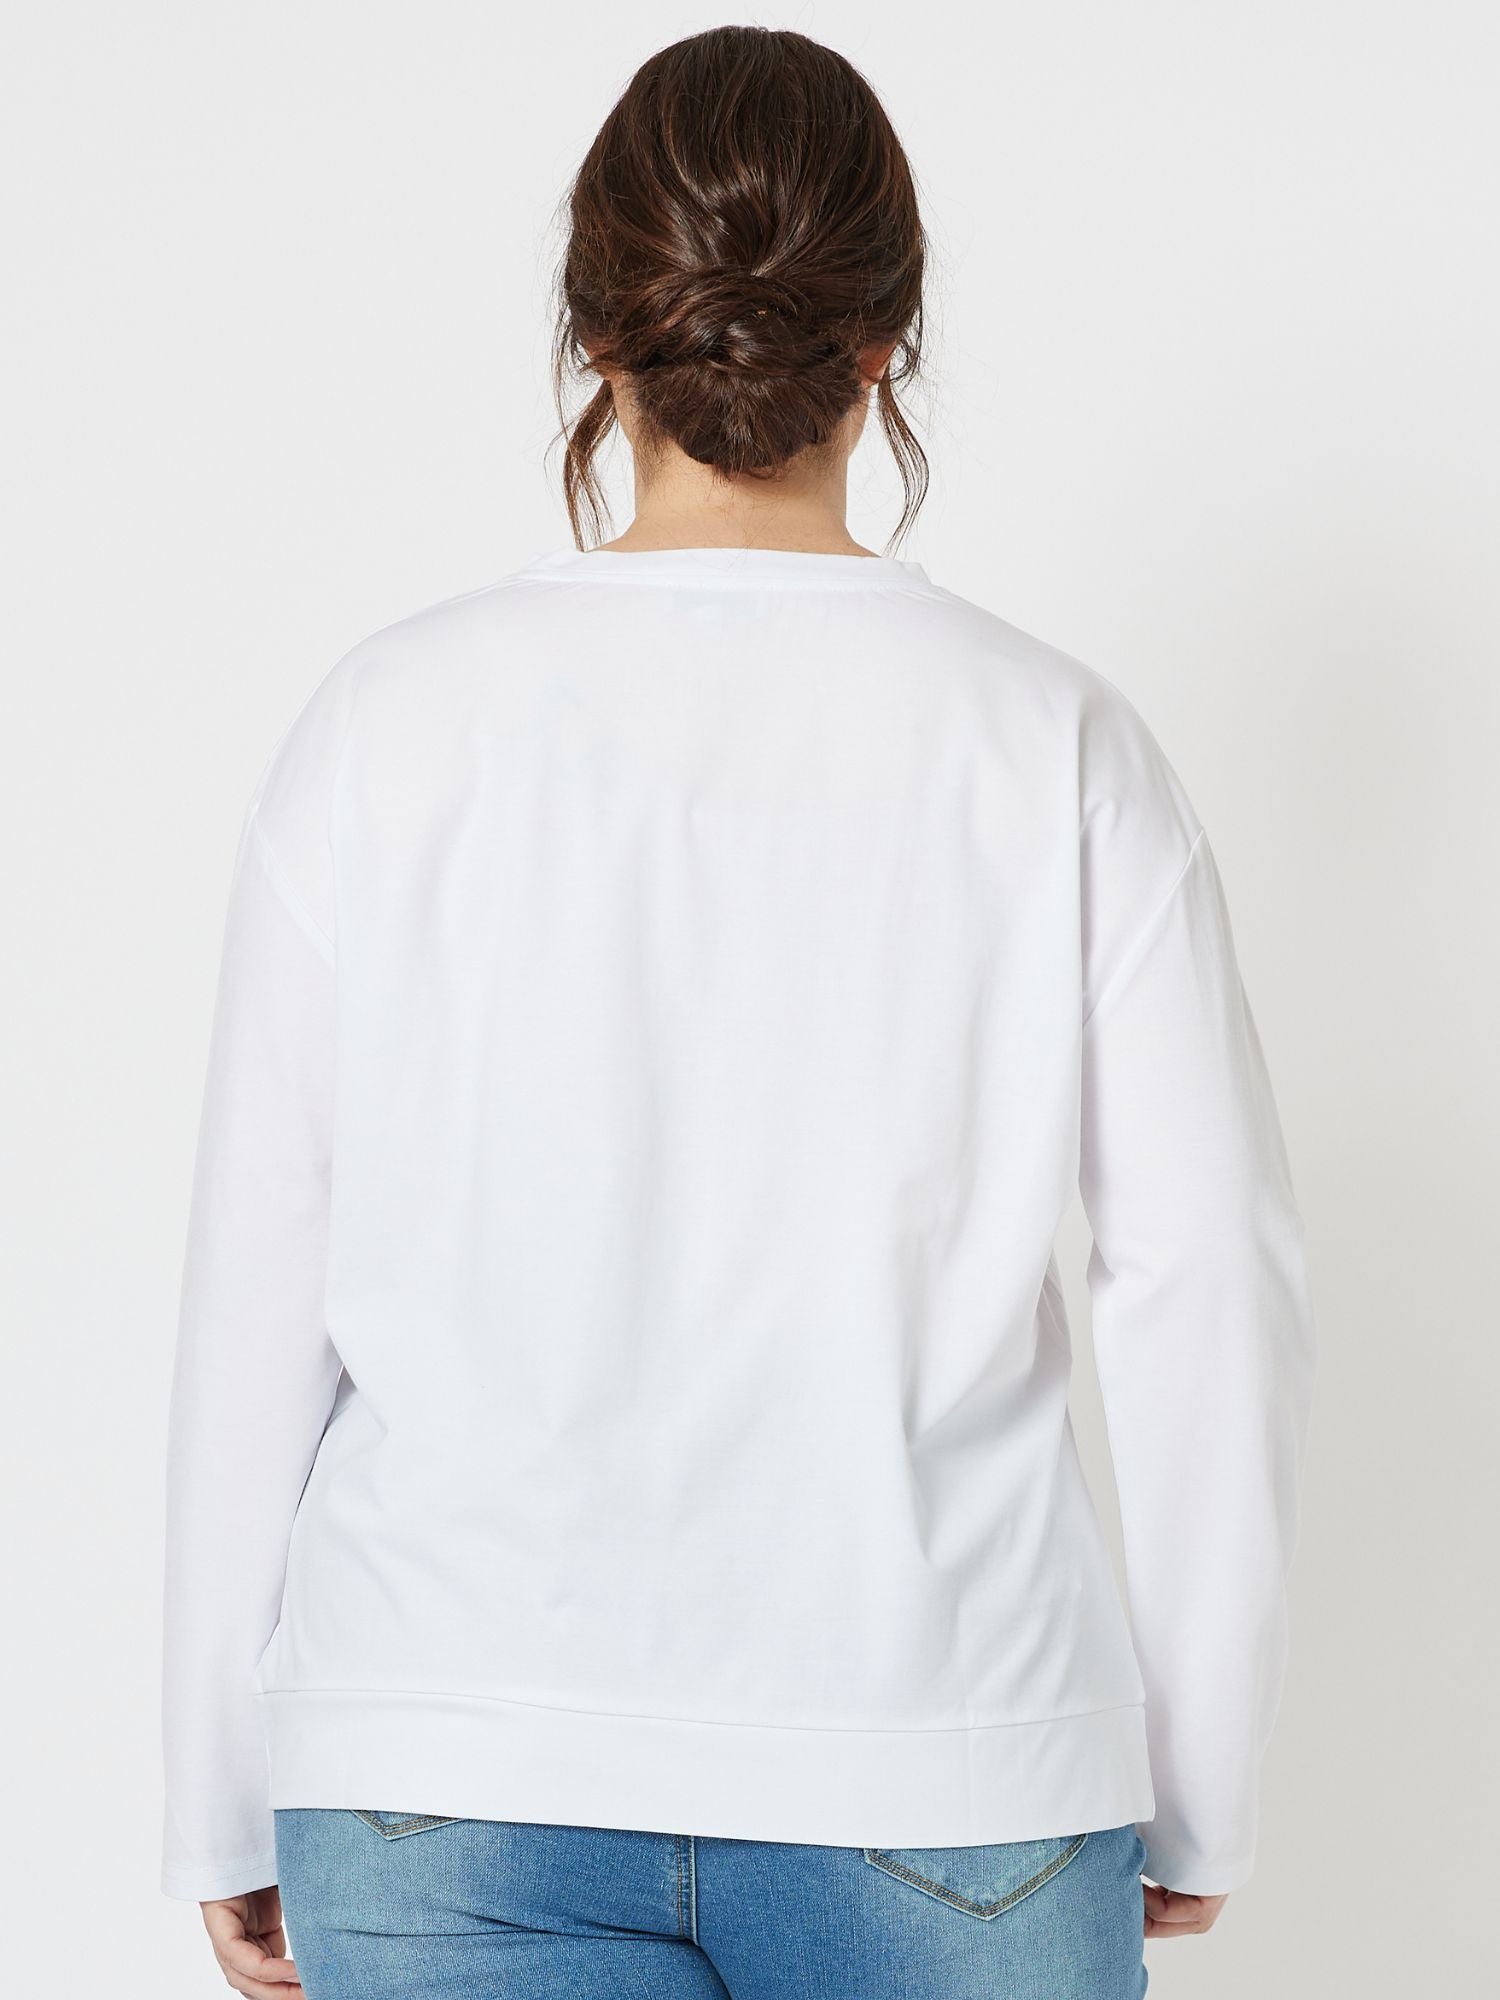 Contrast Stitch Long Sleeve Top - White